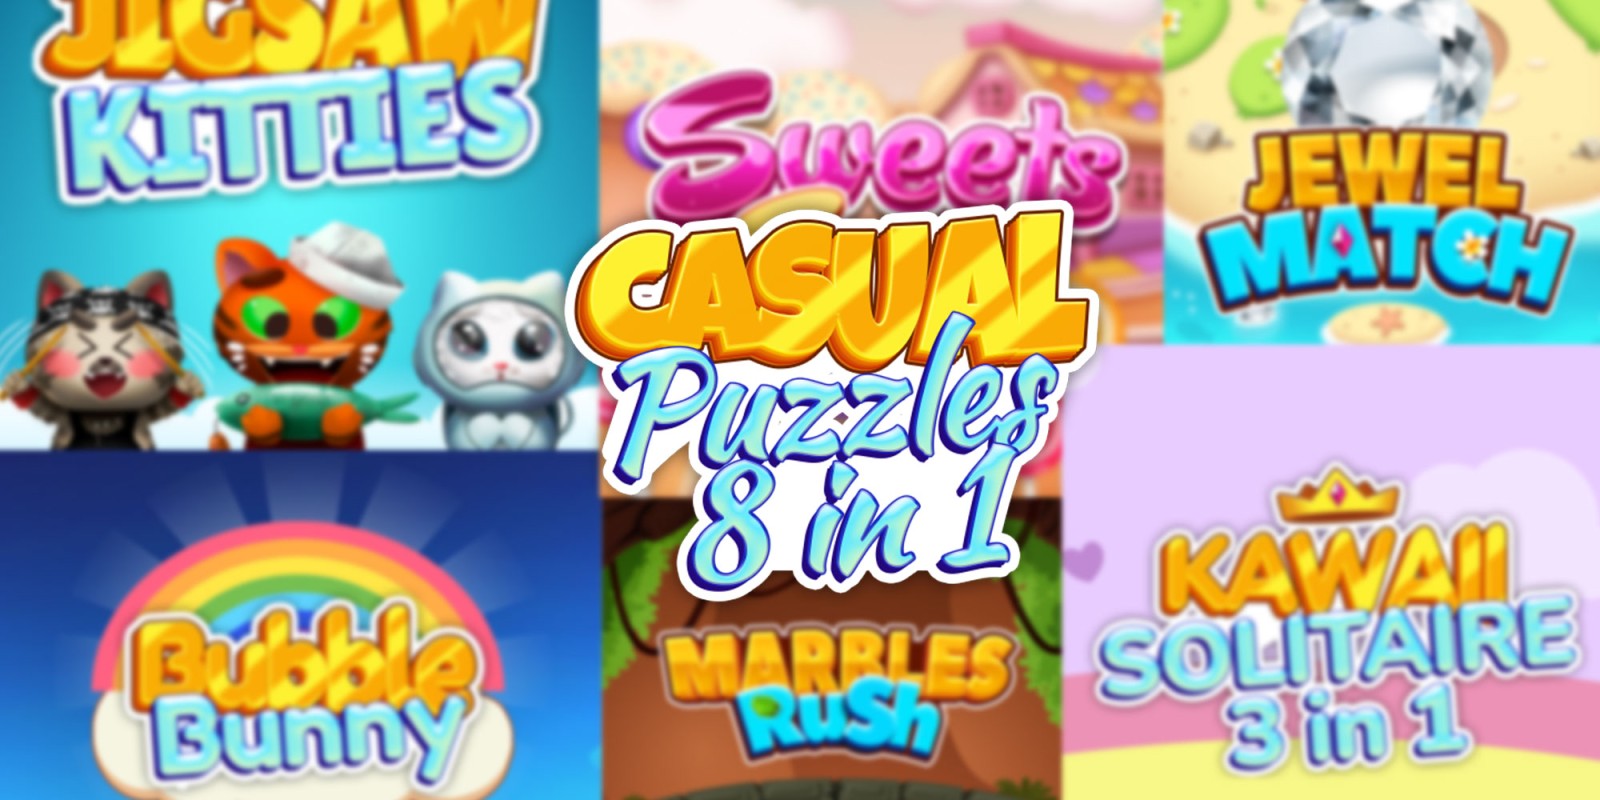 Casual Puzzles Bundle 8 in 1